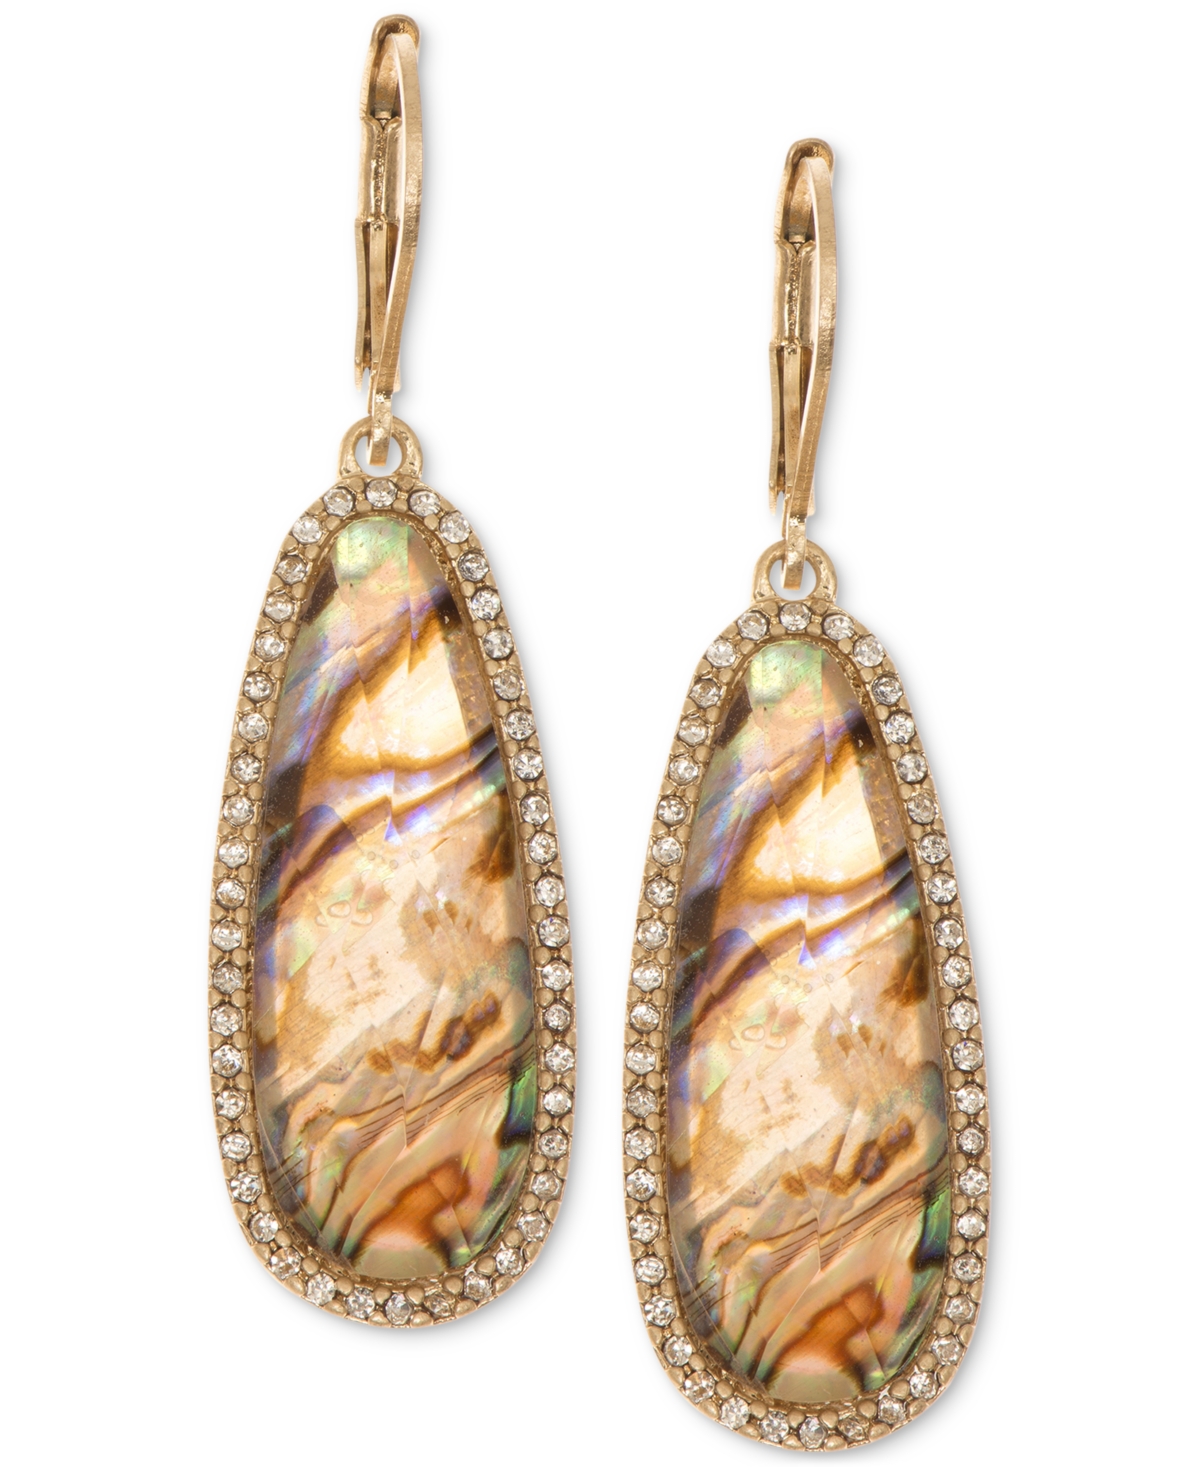 Gold-Tone Iridescent Stone Drop Earrings - Gold